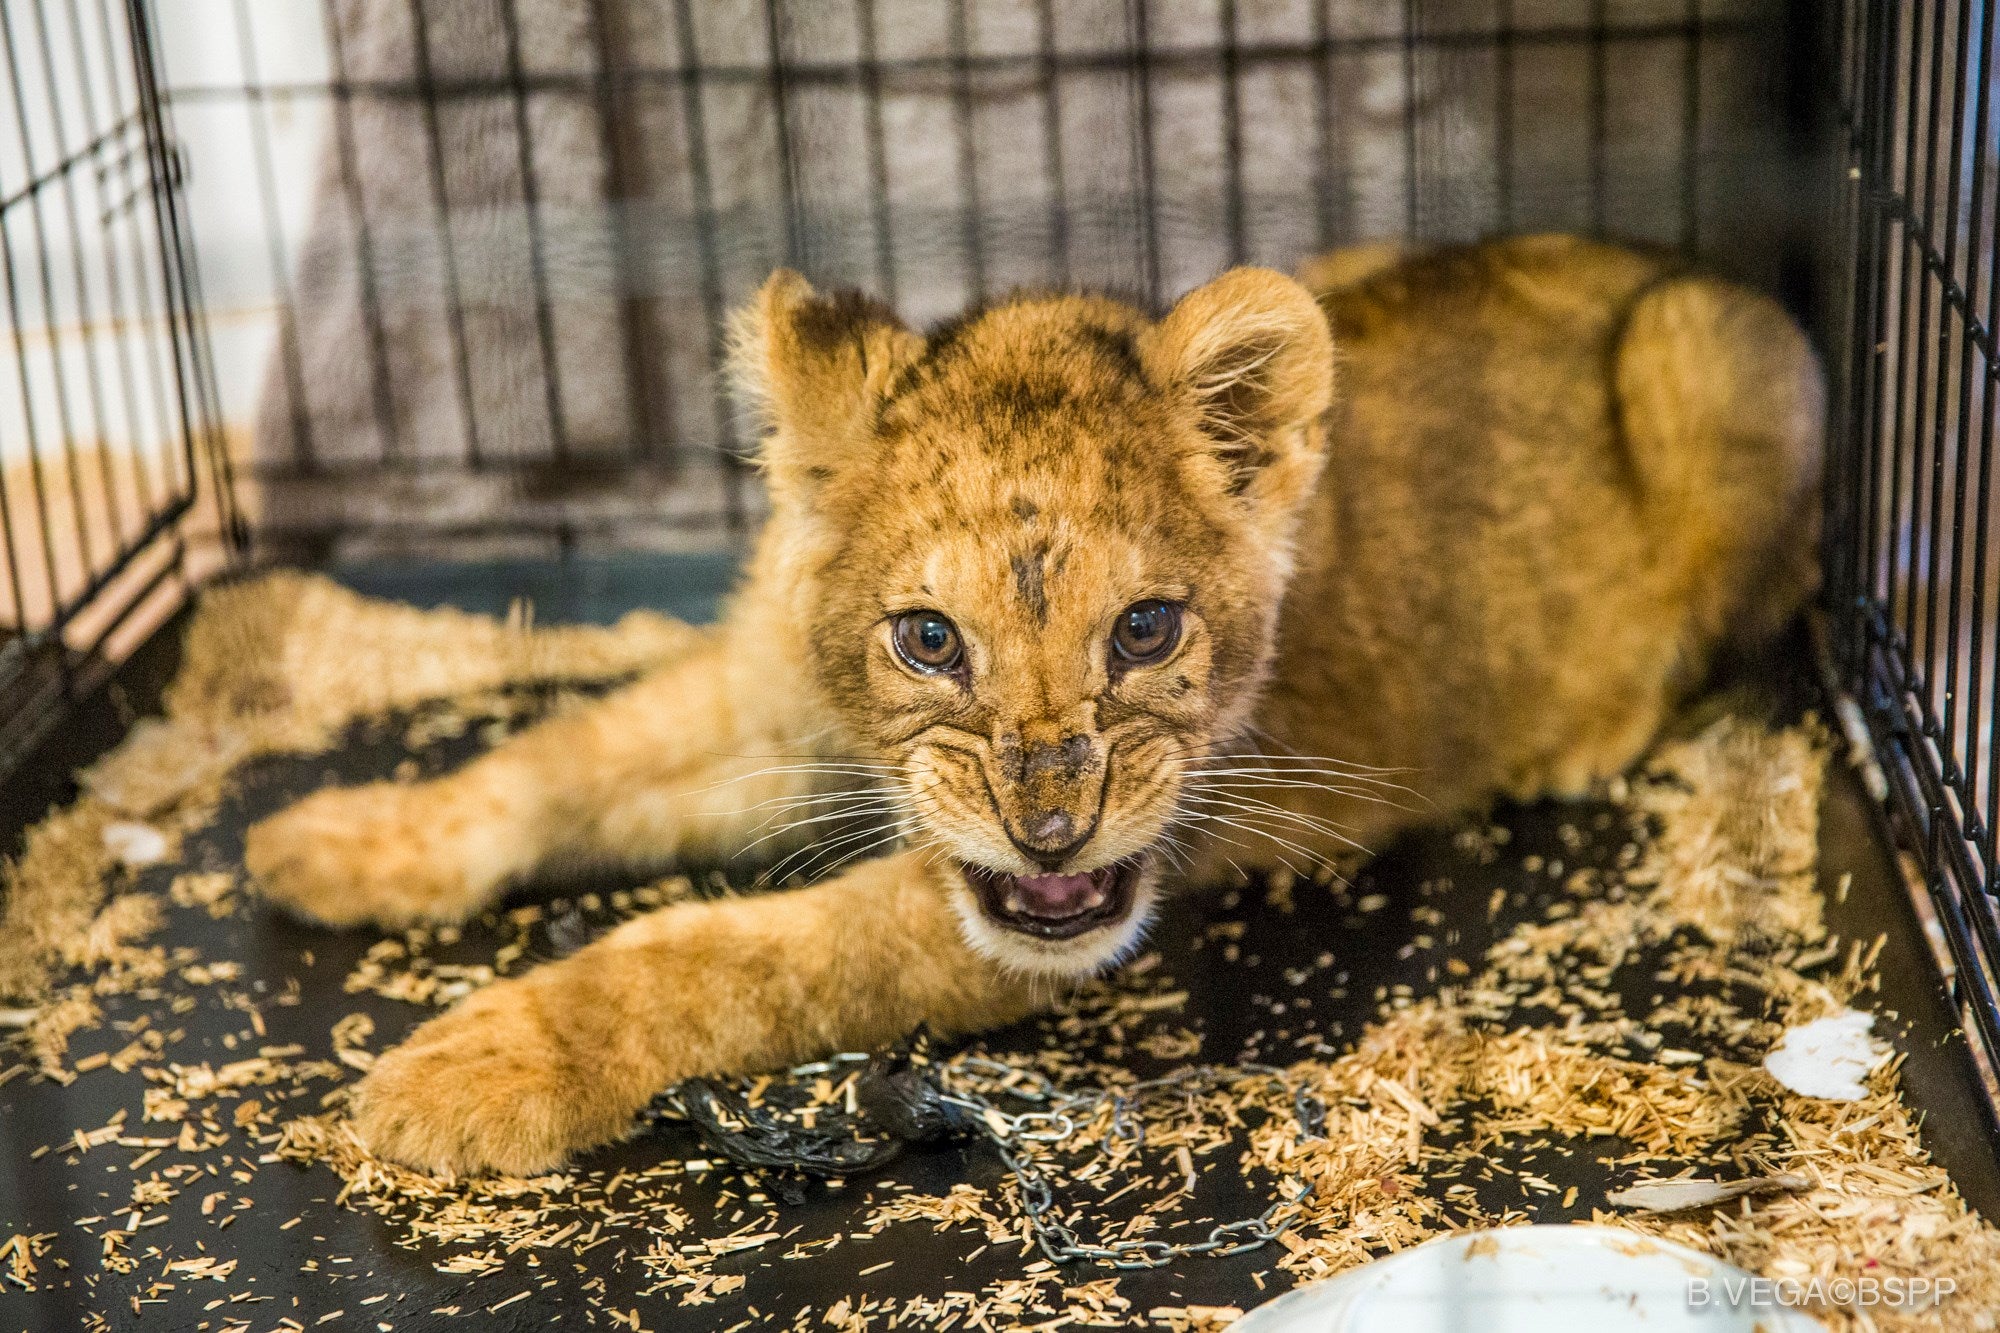 The lion cub was found in an abandoned apartment in a Paris suburb